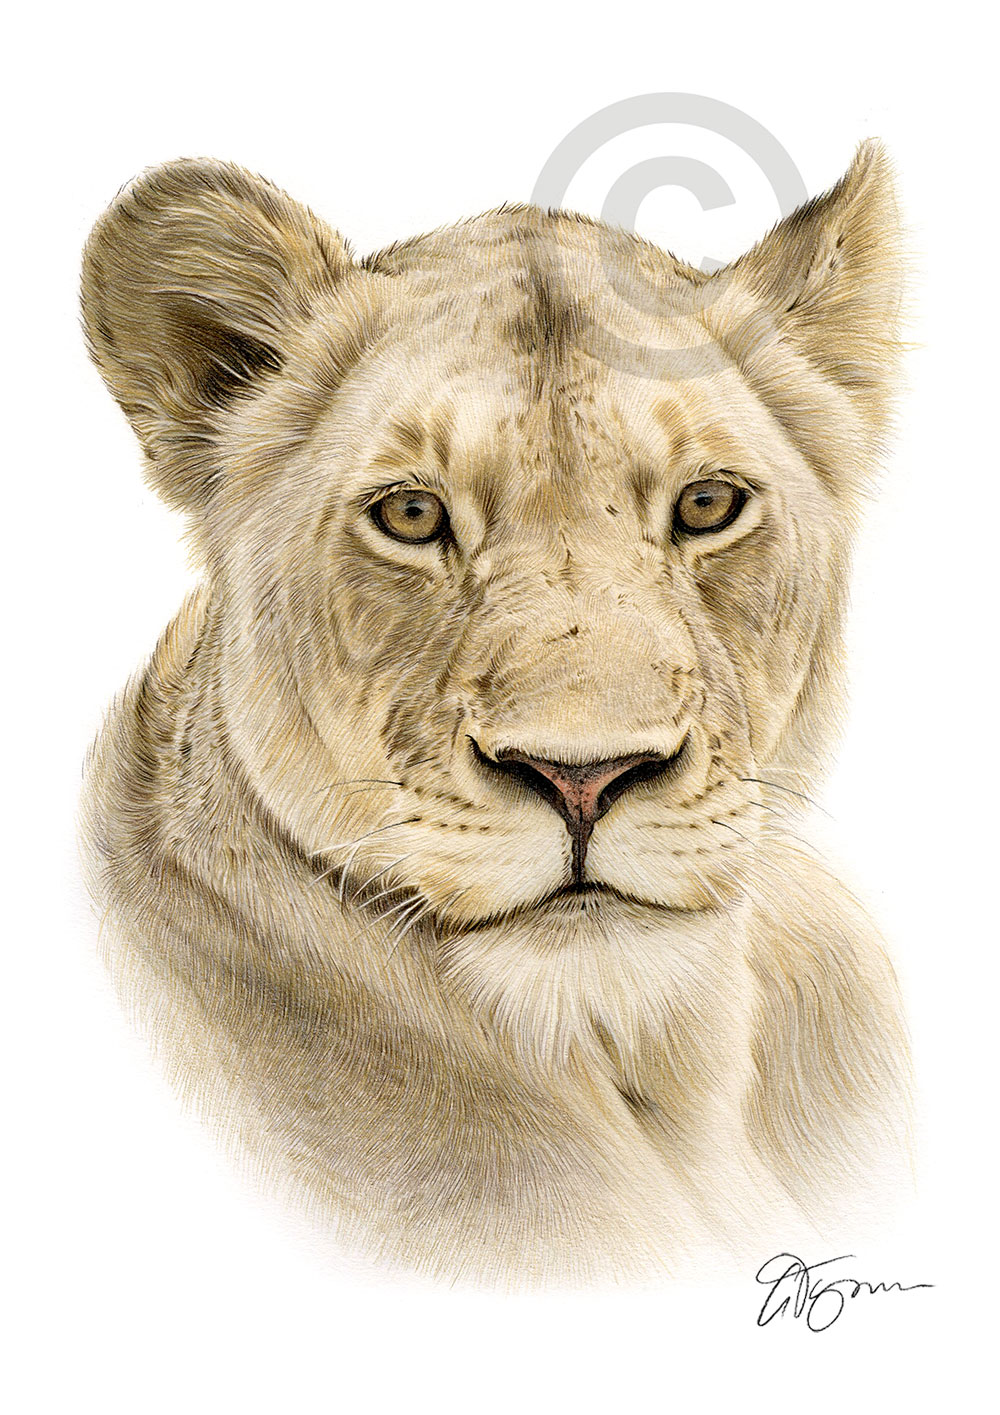 Colour pencil drawing of an African lioness by UK artist Gary Tymon